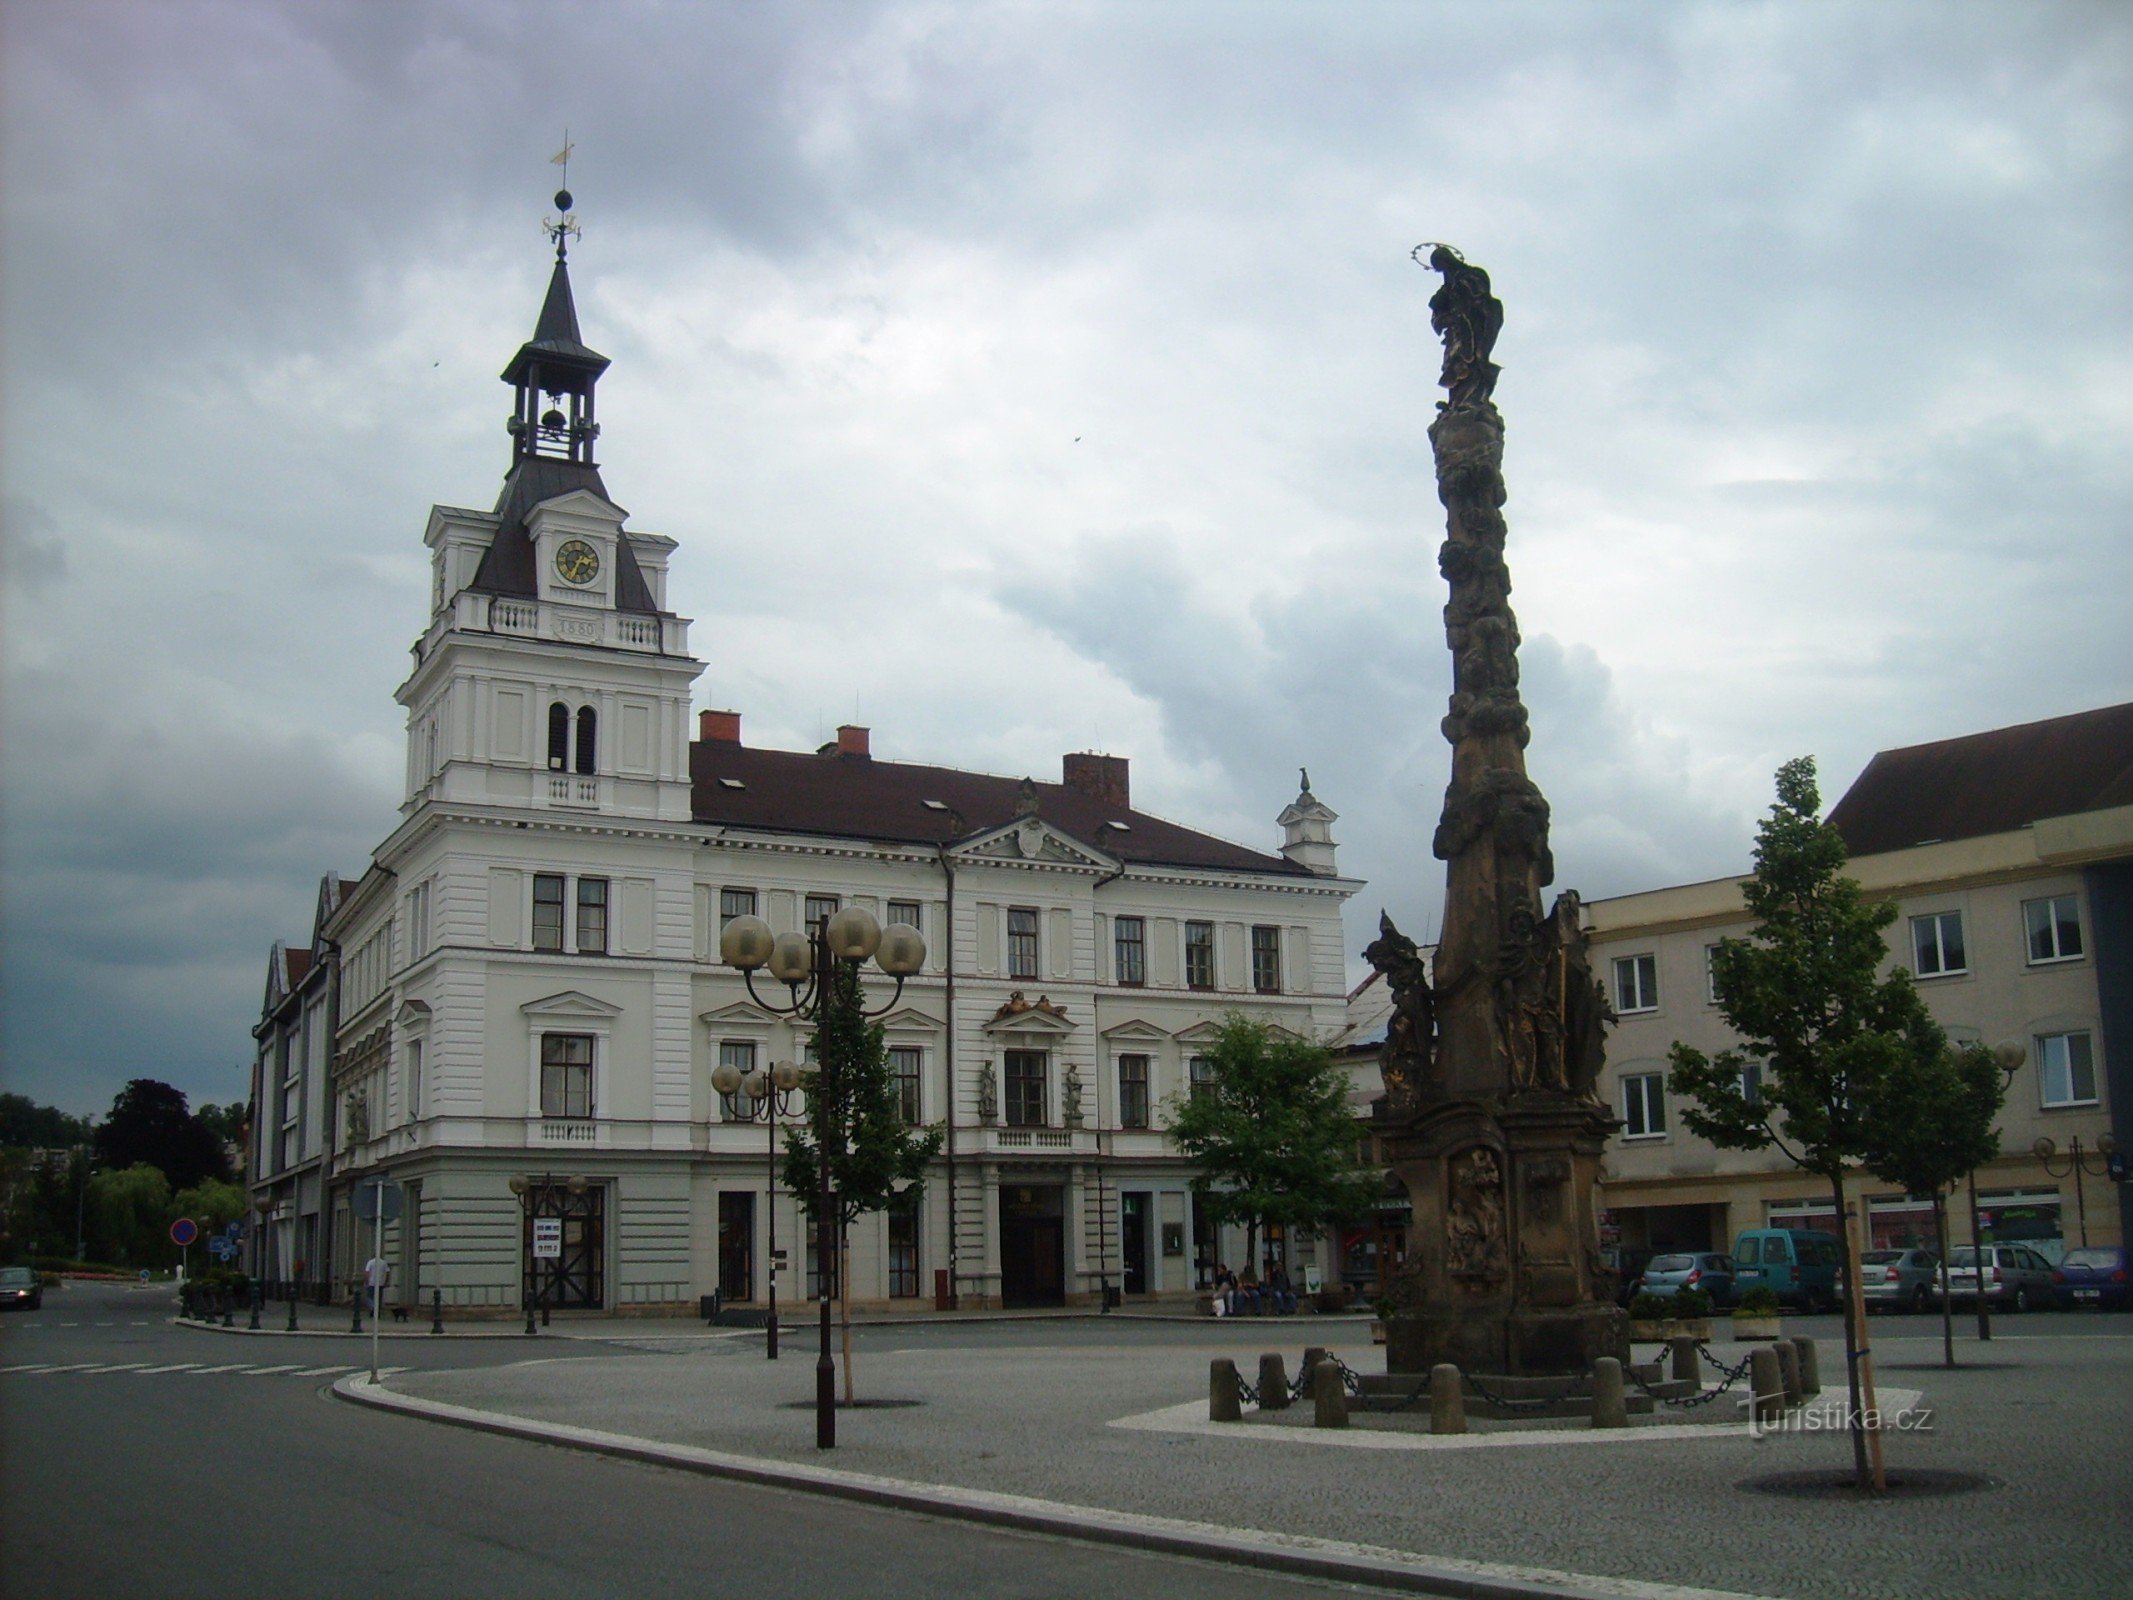 town square